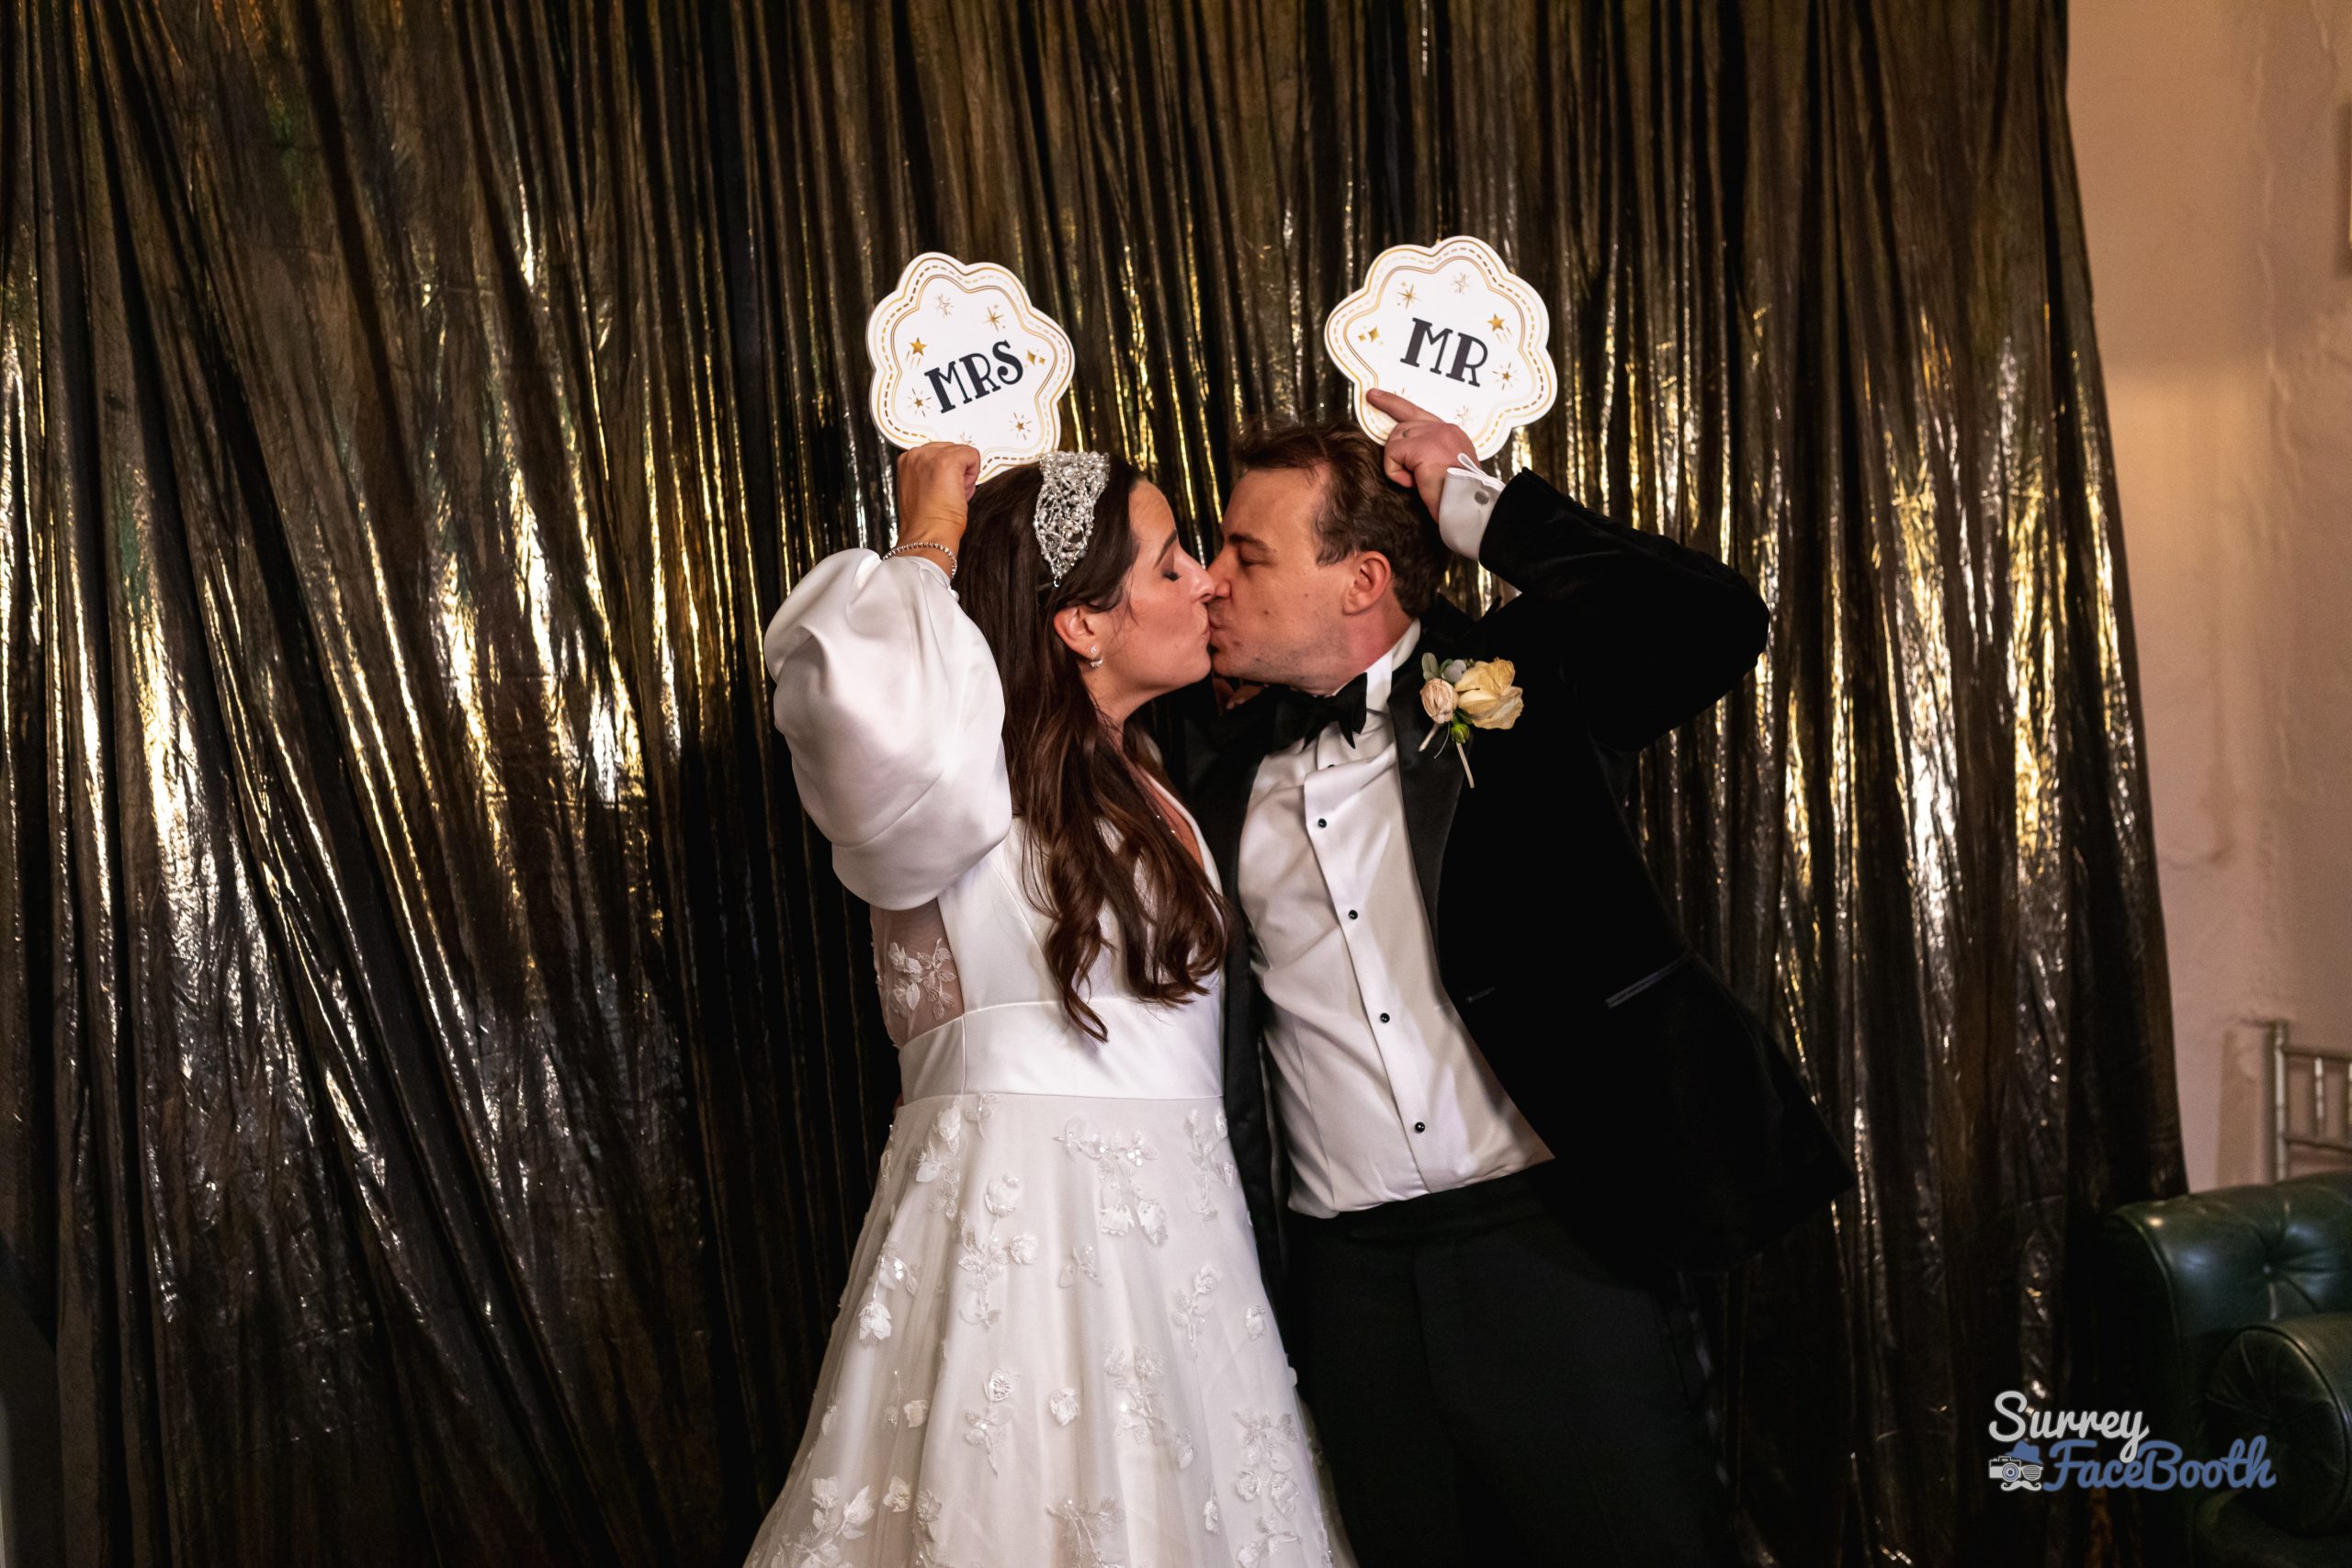 The bride and groom posing for photos in front of a backdrop, using props and sign boards